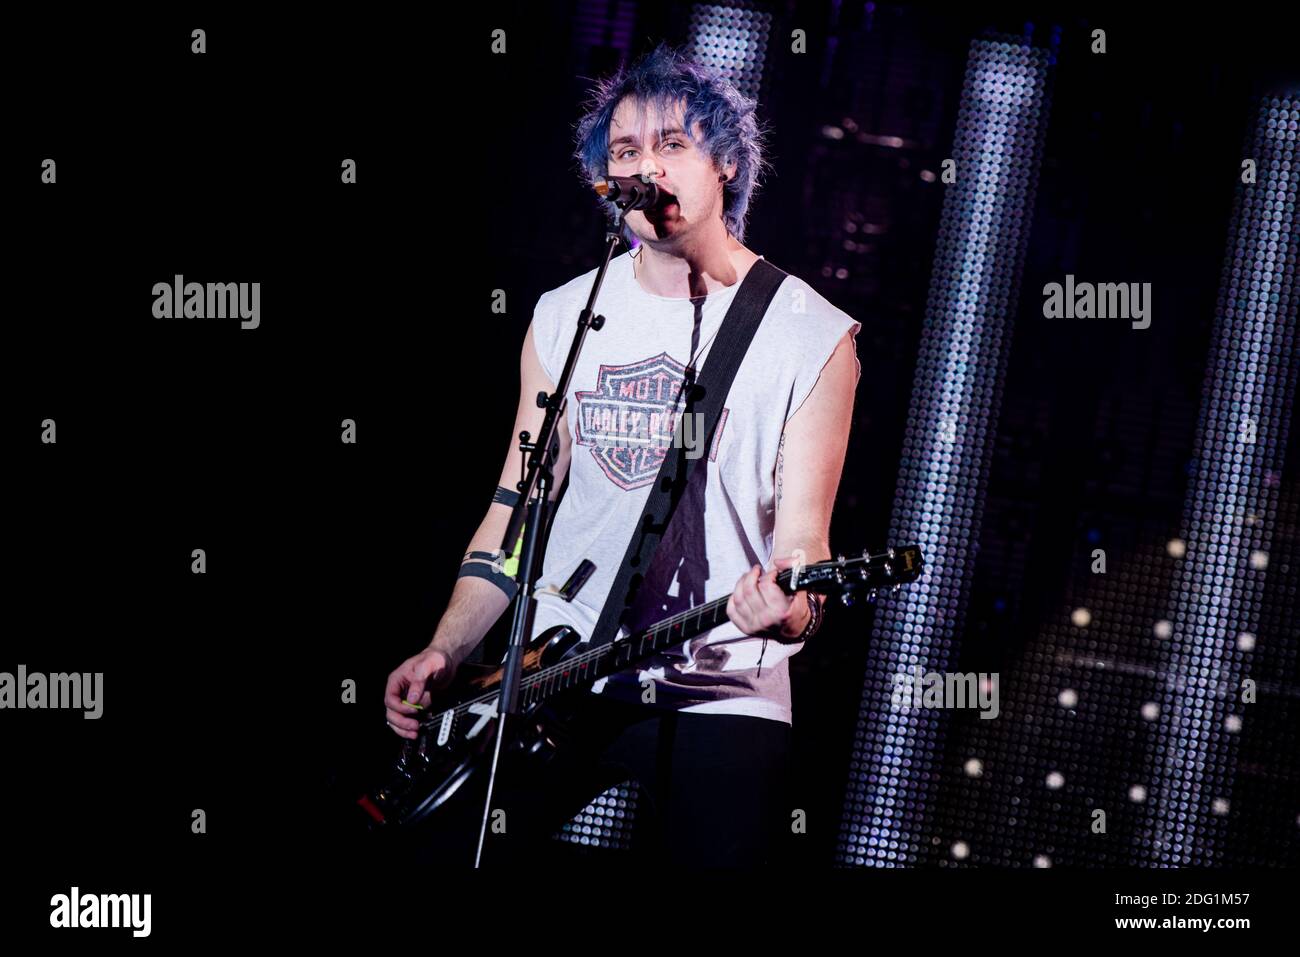 Michael Clifford, of the Australian pop-rock band 5 Seconds Of Summer, performing live for the “Rock Out with Your Socks Out Tour” at the Pala Alpitour in Torino, Italy Stock Photo